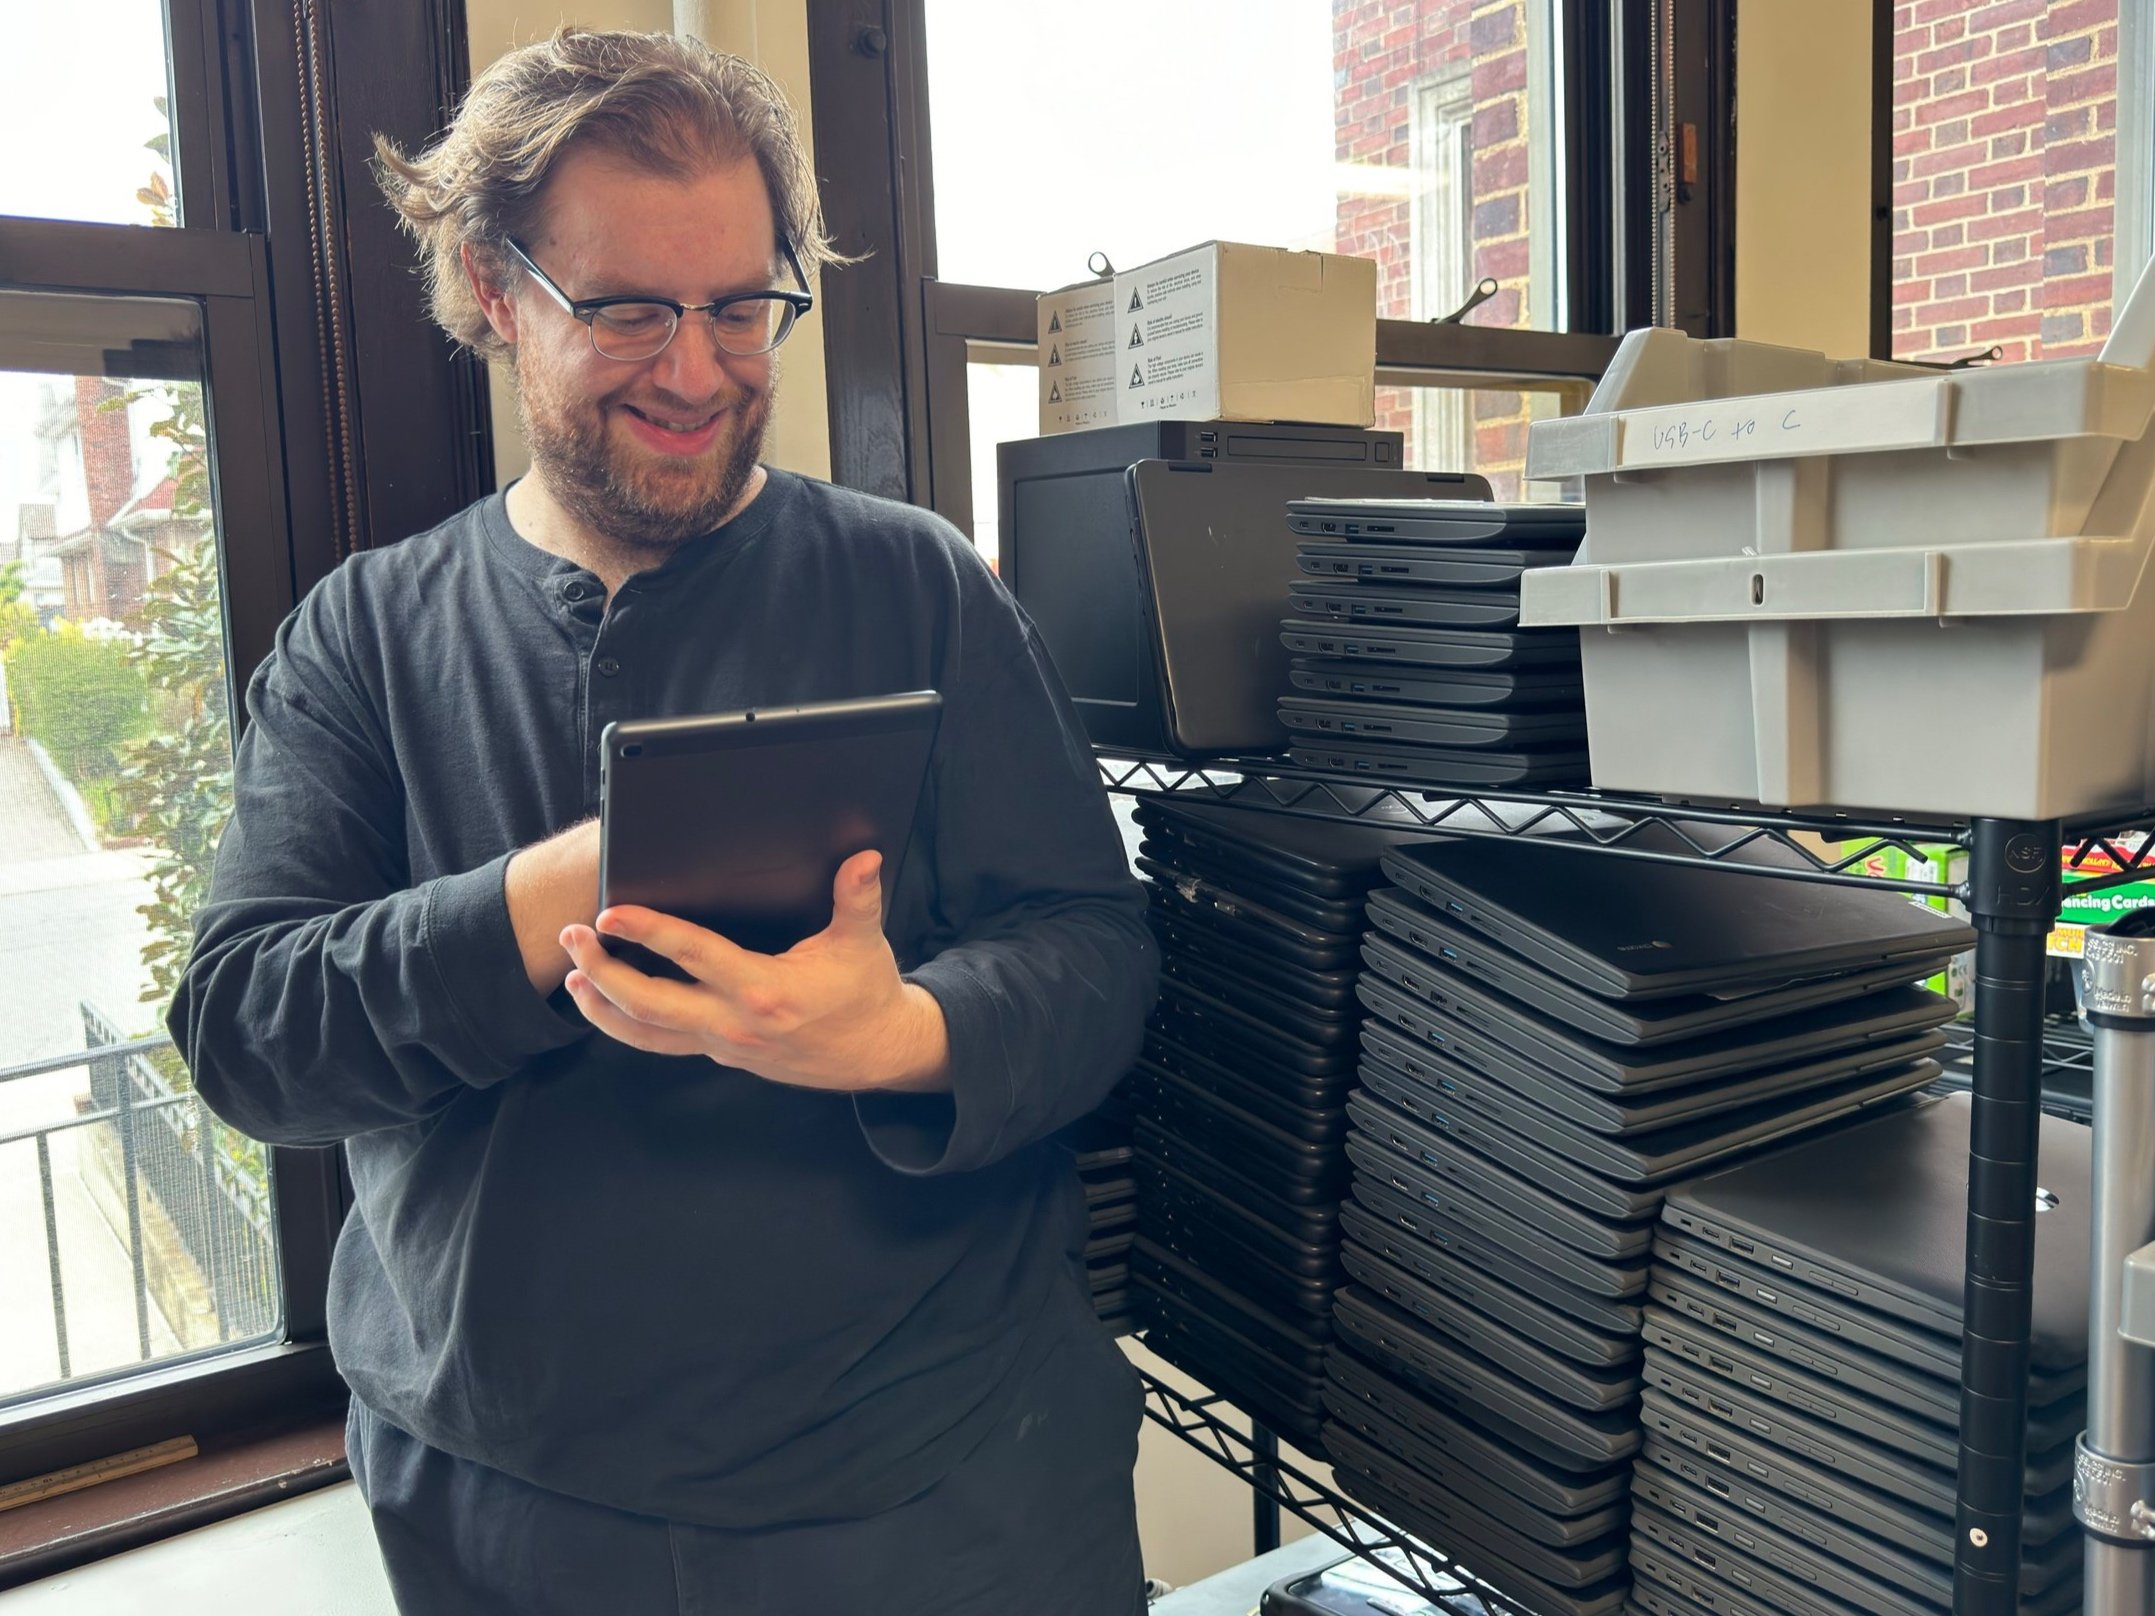  Alex holds an Android tablet, smiling.  He stands next to stacks of many Chromebooks. 